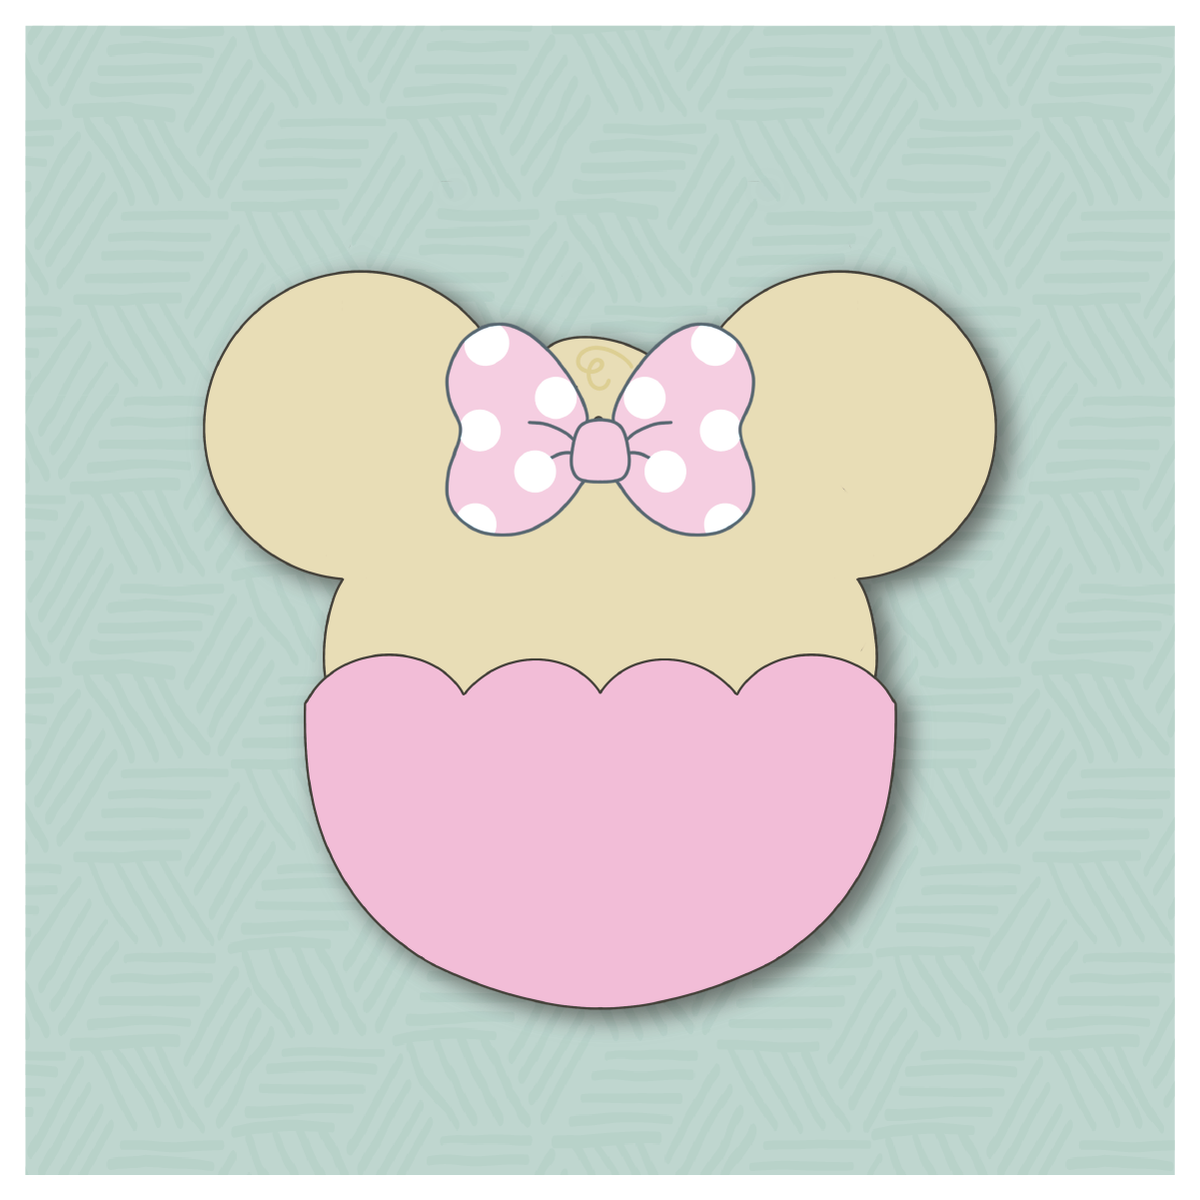 Girly Mouse Chick in Egg Cookie Cutter